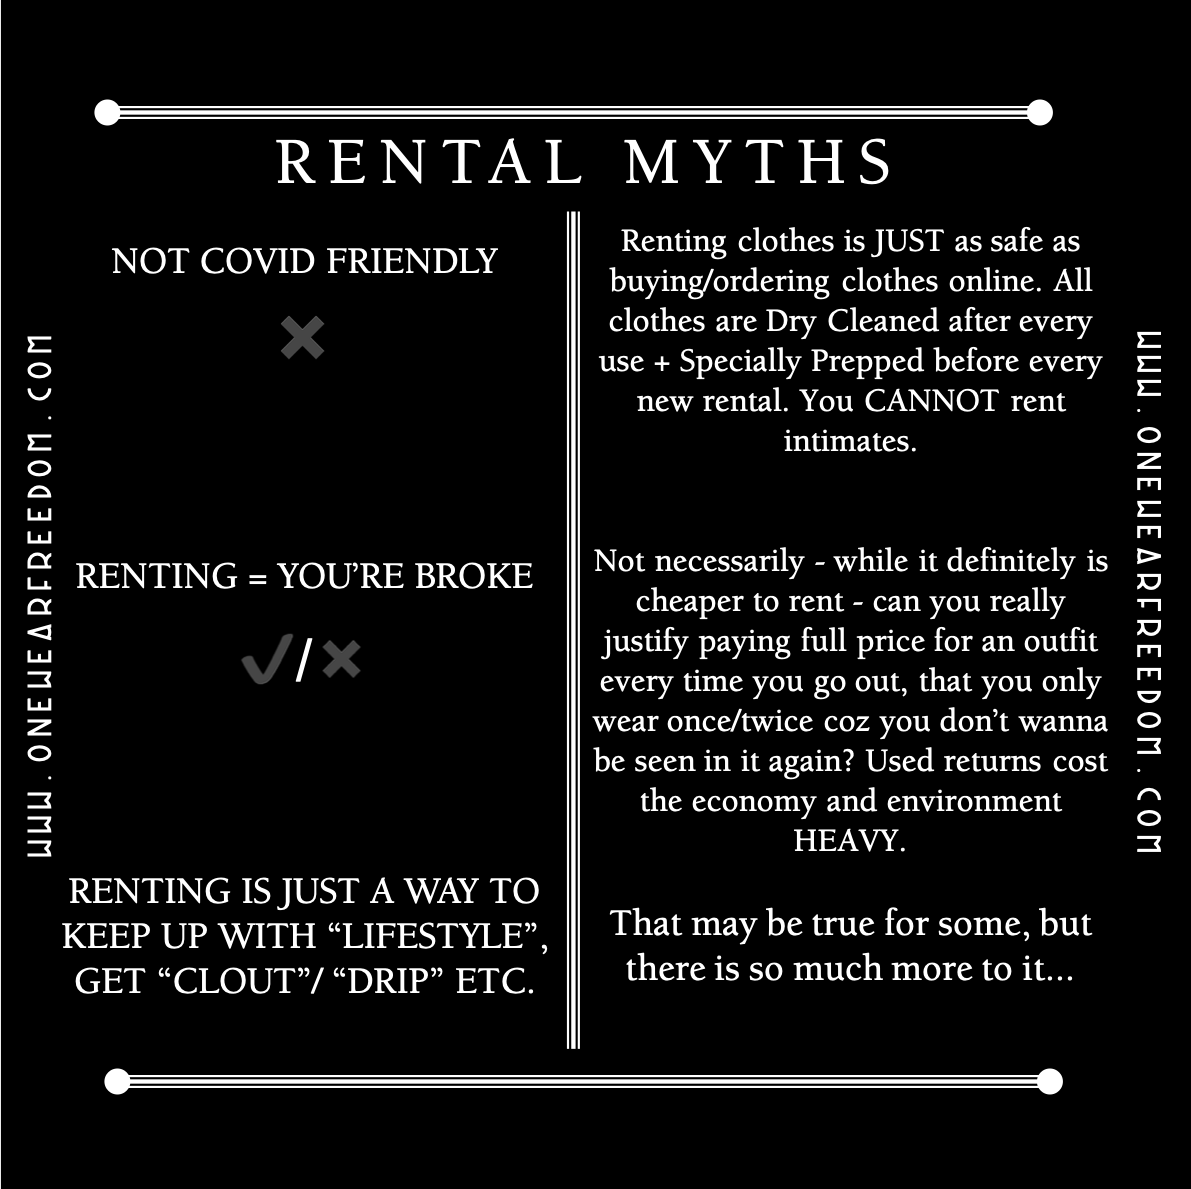 Rental Myth: Not covid friendly - Renting clothes is JUST as safe as buying/ordering clothes online. All clothes are Dry Cleaned after every use + Specially Prepped before every new rental. You CANNOT rent intimates. RENTING = YOU’RE BROKE - Not necessarily - while it definitely is cheaper to rent - can you really justify paying full price for an outfit every time you go out, that you only wear once/twice coz you don’t wanna be seen in it again? Used returns cost the economy and environment HEAVY. RENTING IS JUST A WAY TO KEEP UP WITH “LIFESTYLE”, GET “CLOUT”/ “DRIP” ETC. That may be true for some, but there is so much more to it...